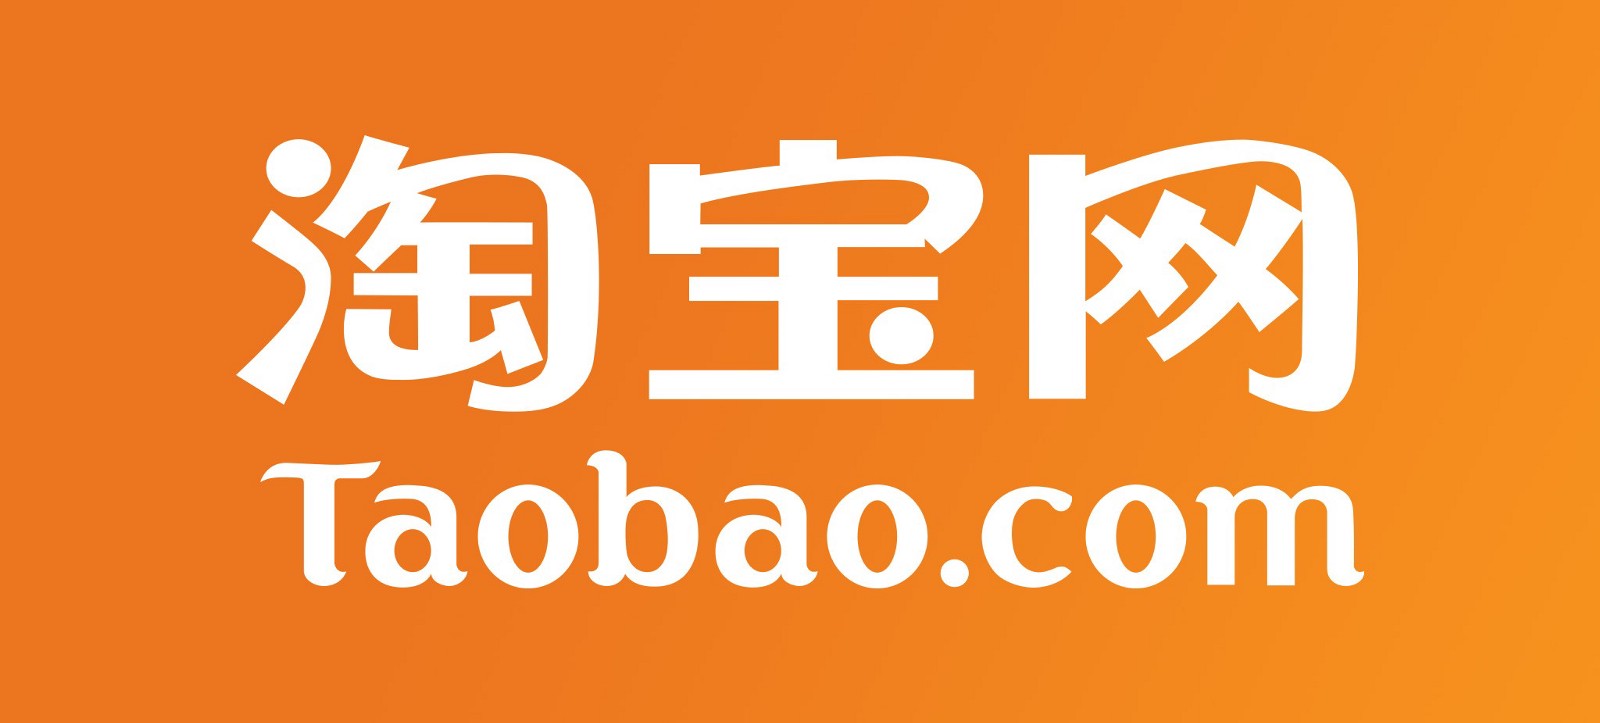 13-facts-about-taobao